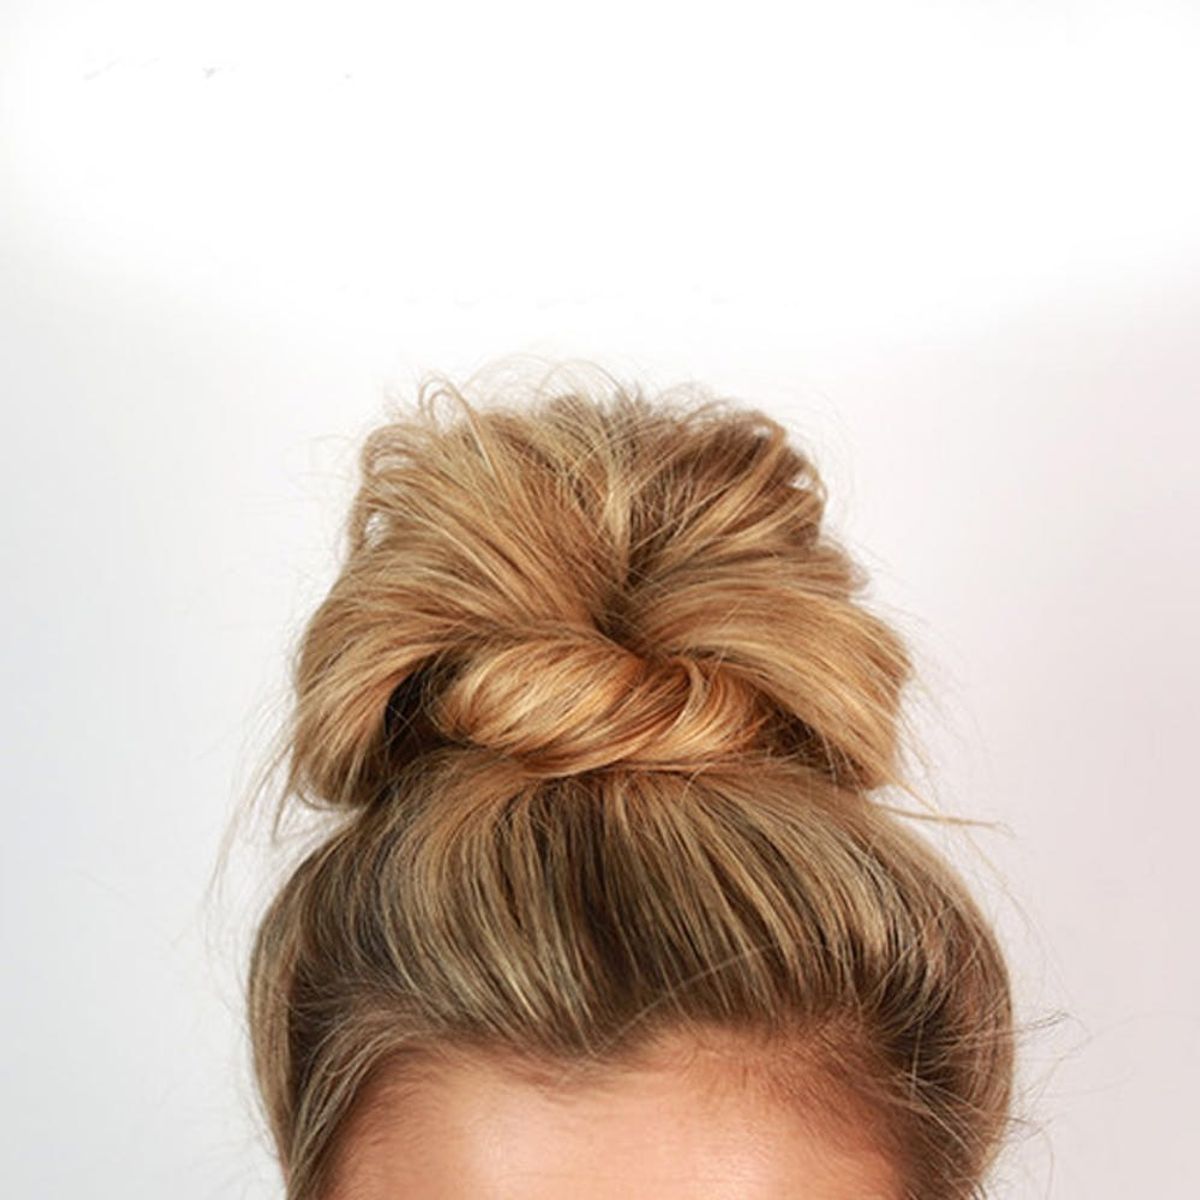 This Summer’s Must-Try Messy Buns, According to Pinterest